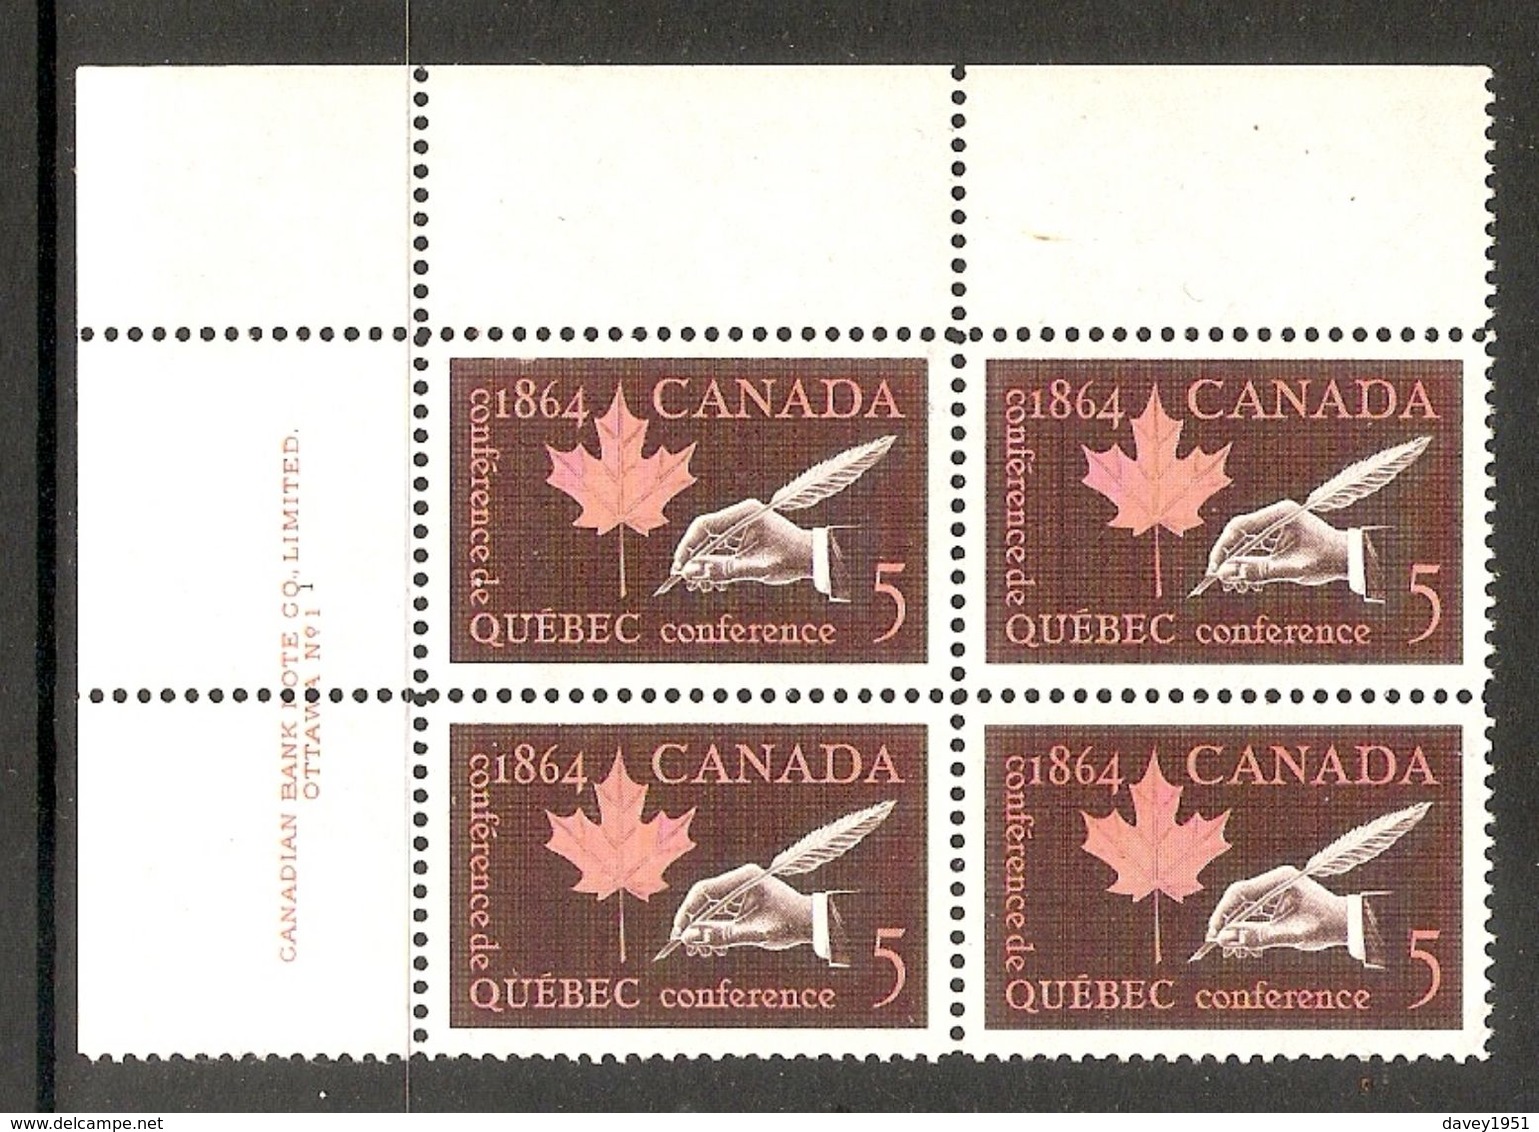 006259 Canada 1964 Quebec 5c Plate Block 1 UL MNH - Num. Planches & Inscriptions Marge